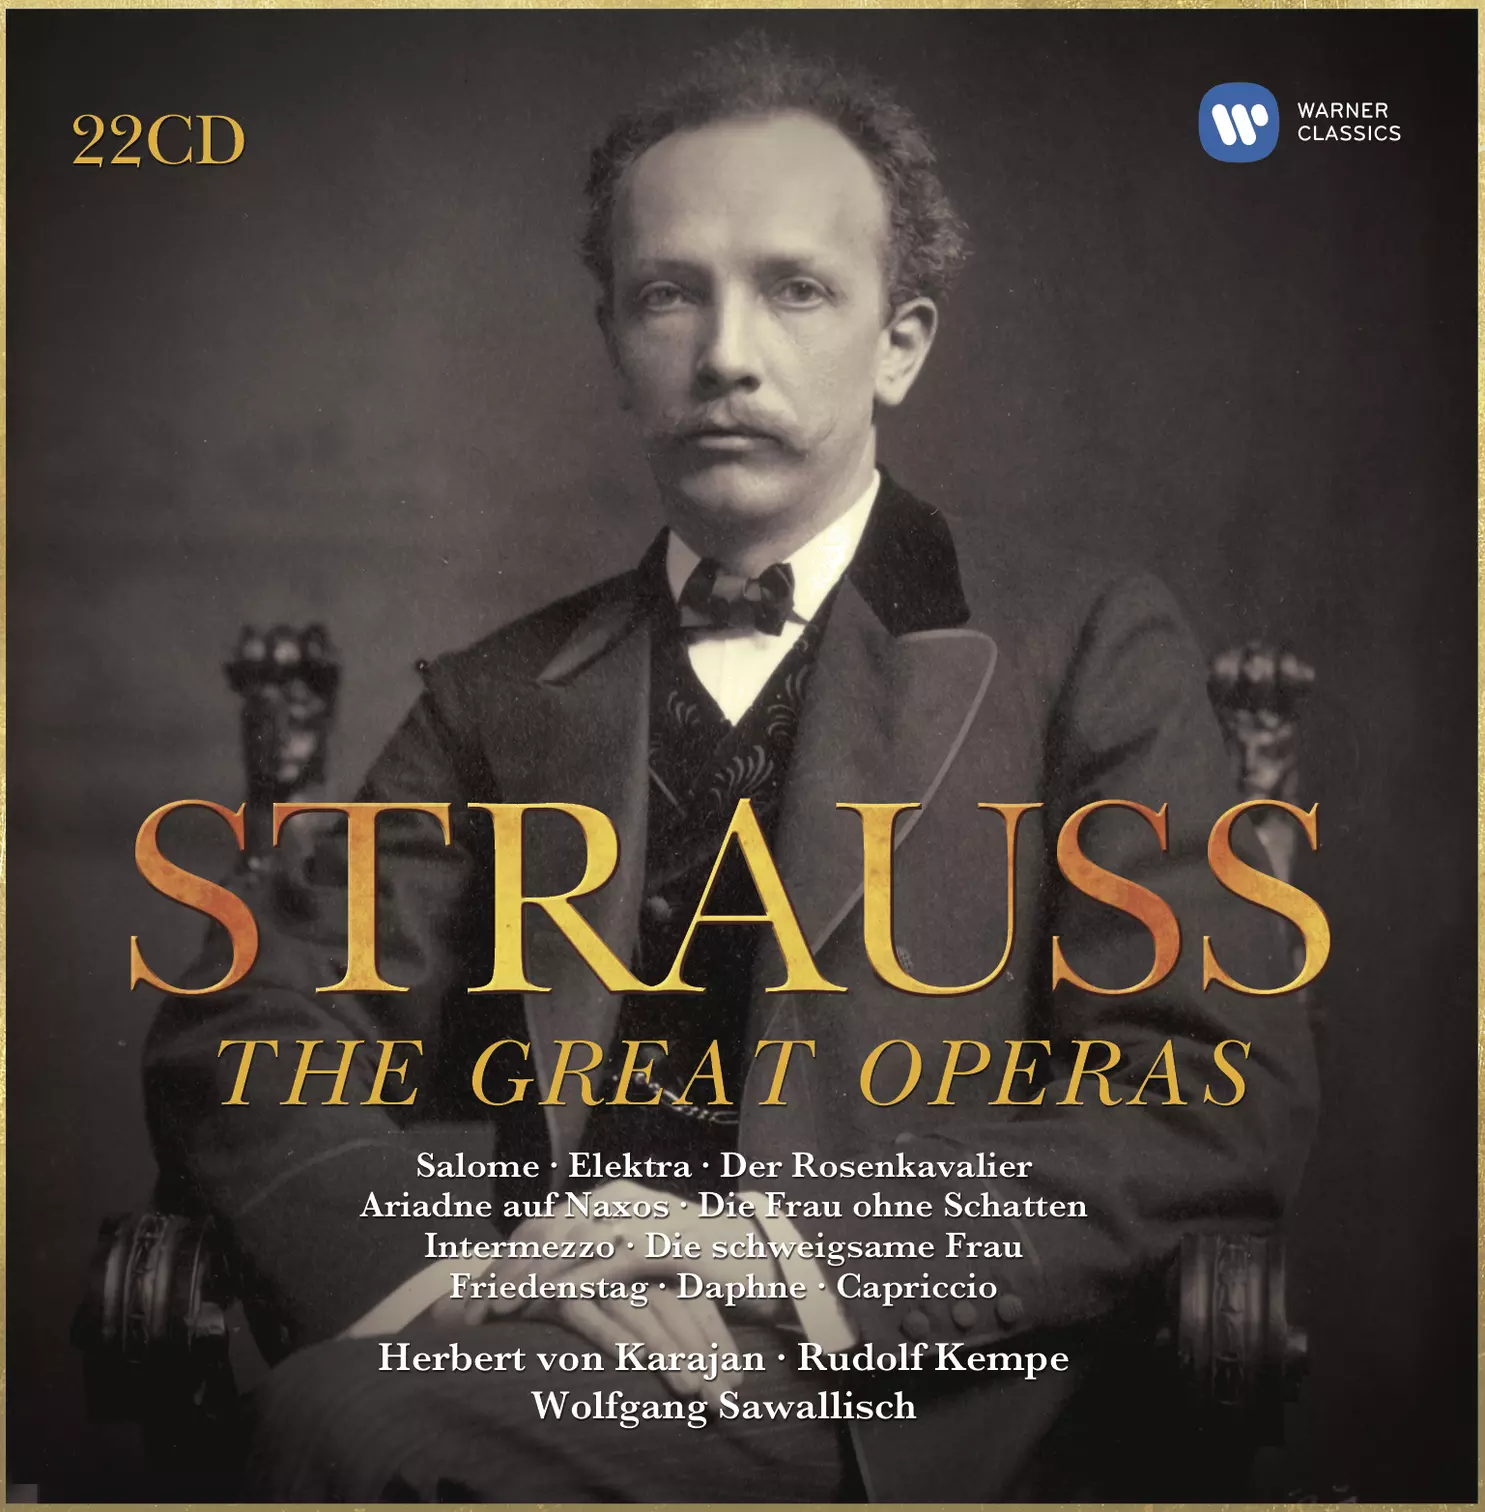 R. Strauss: The Great Operas